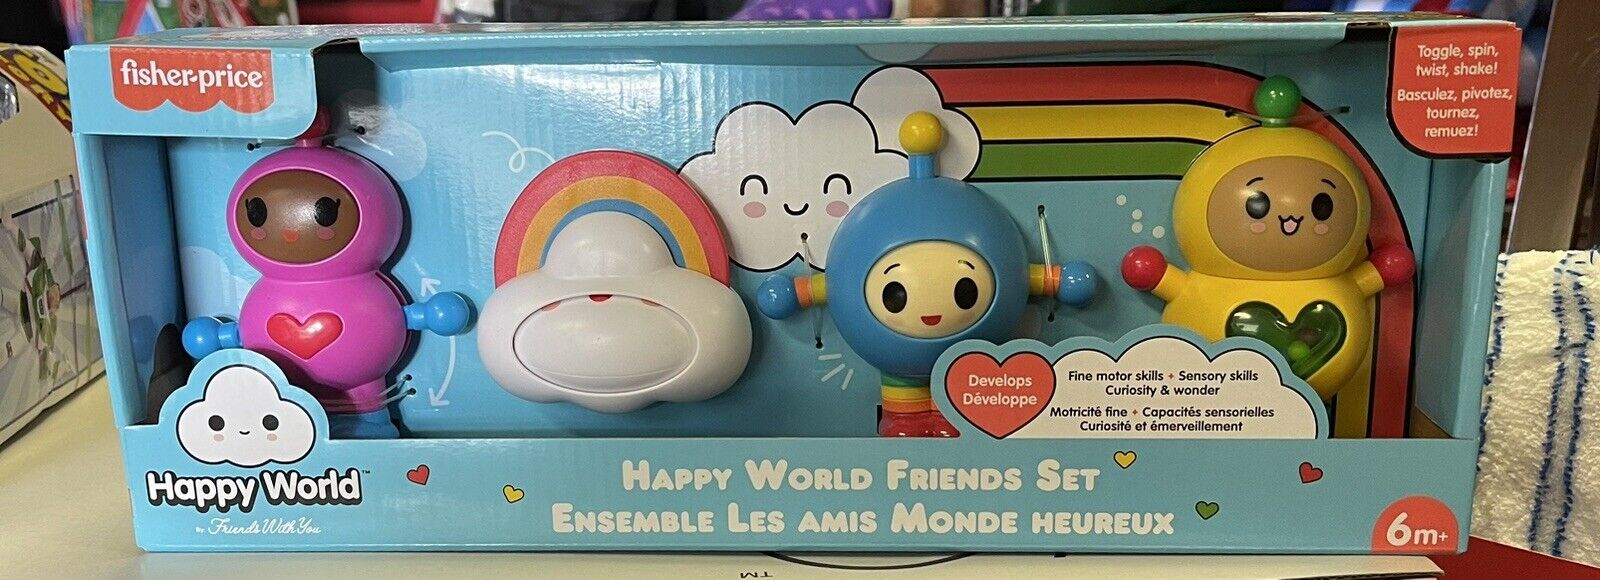 Happy World Friend Set Friends With You Fisher Price Toggle Spin Twist Shake New